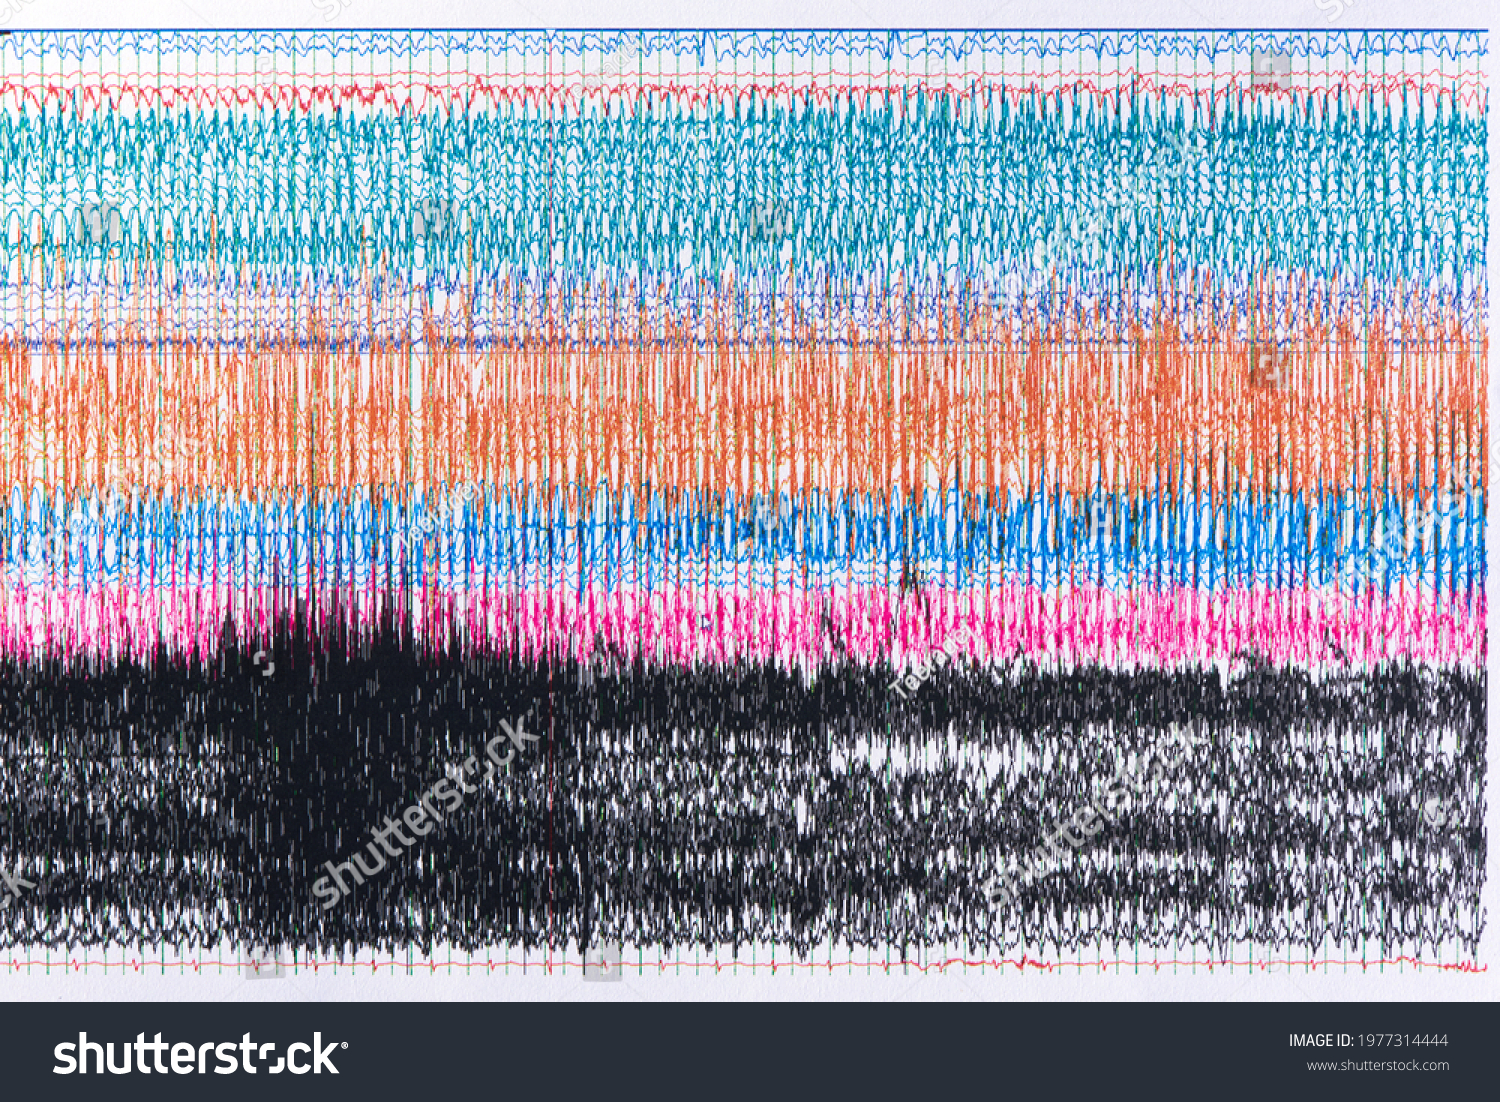 Photograph of brain waves during seizure.or ictal EEG  Seizure waves showing high amplitudes and high frequency. #1977314444